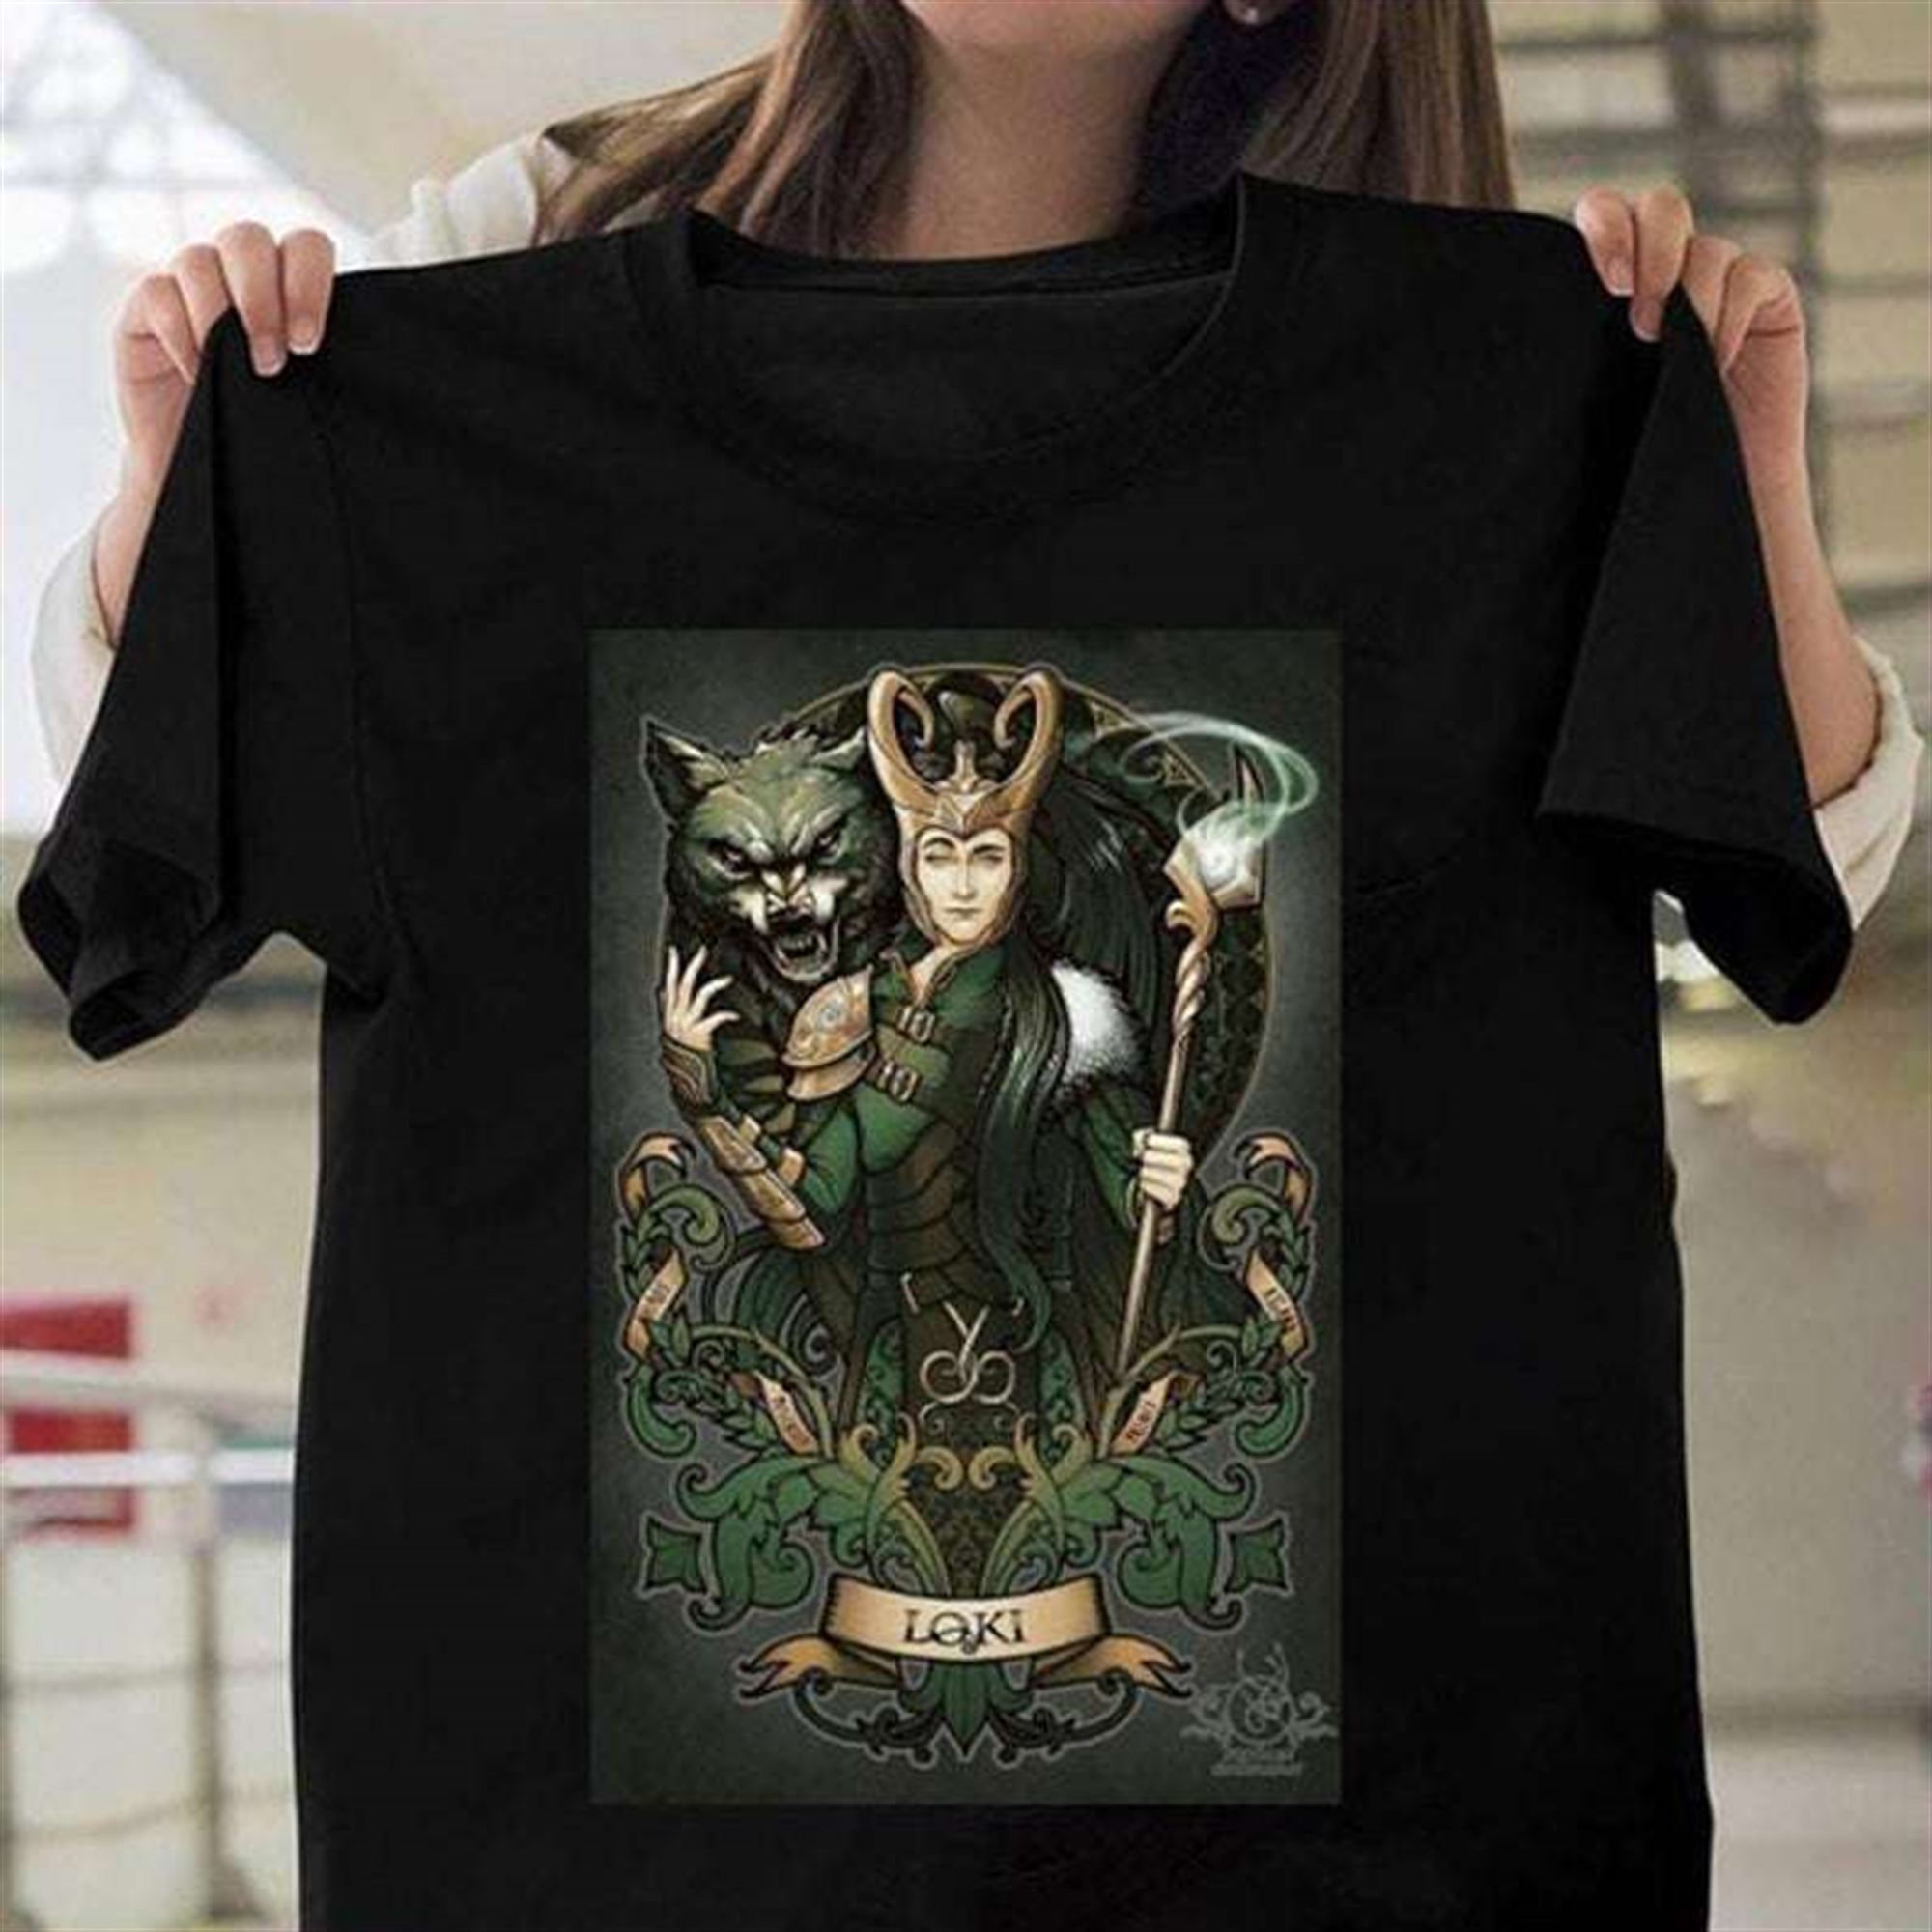 Marvel The Avengers Loki Comic Book Pages T Shirt Size Up To 5xl